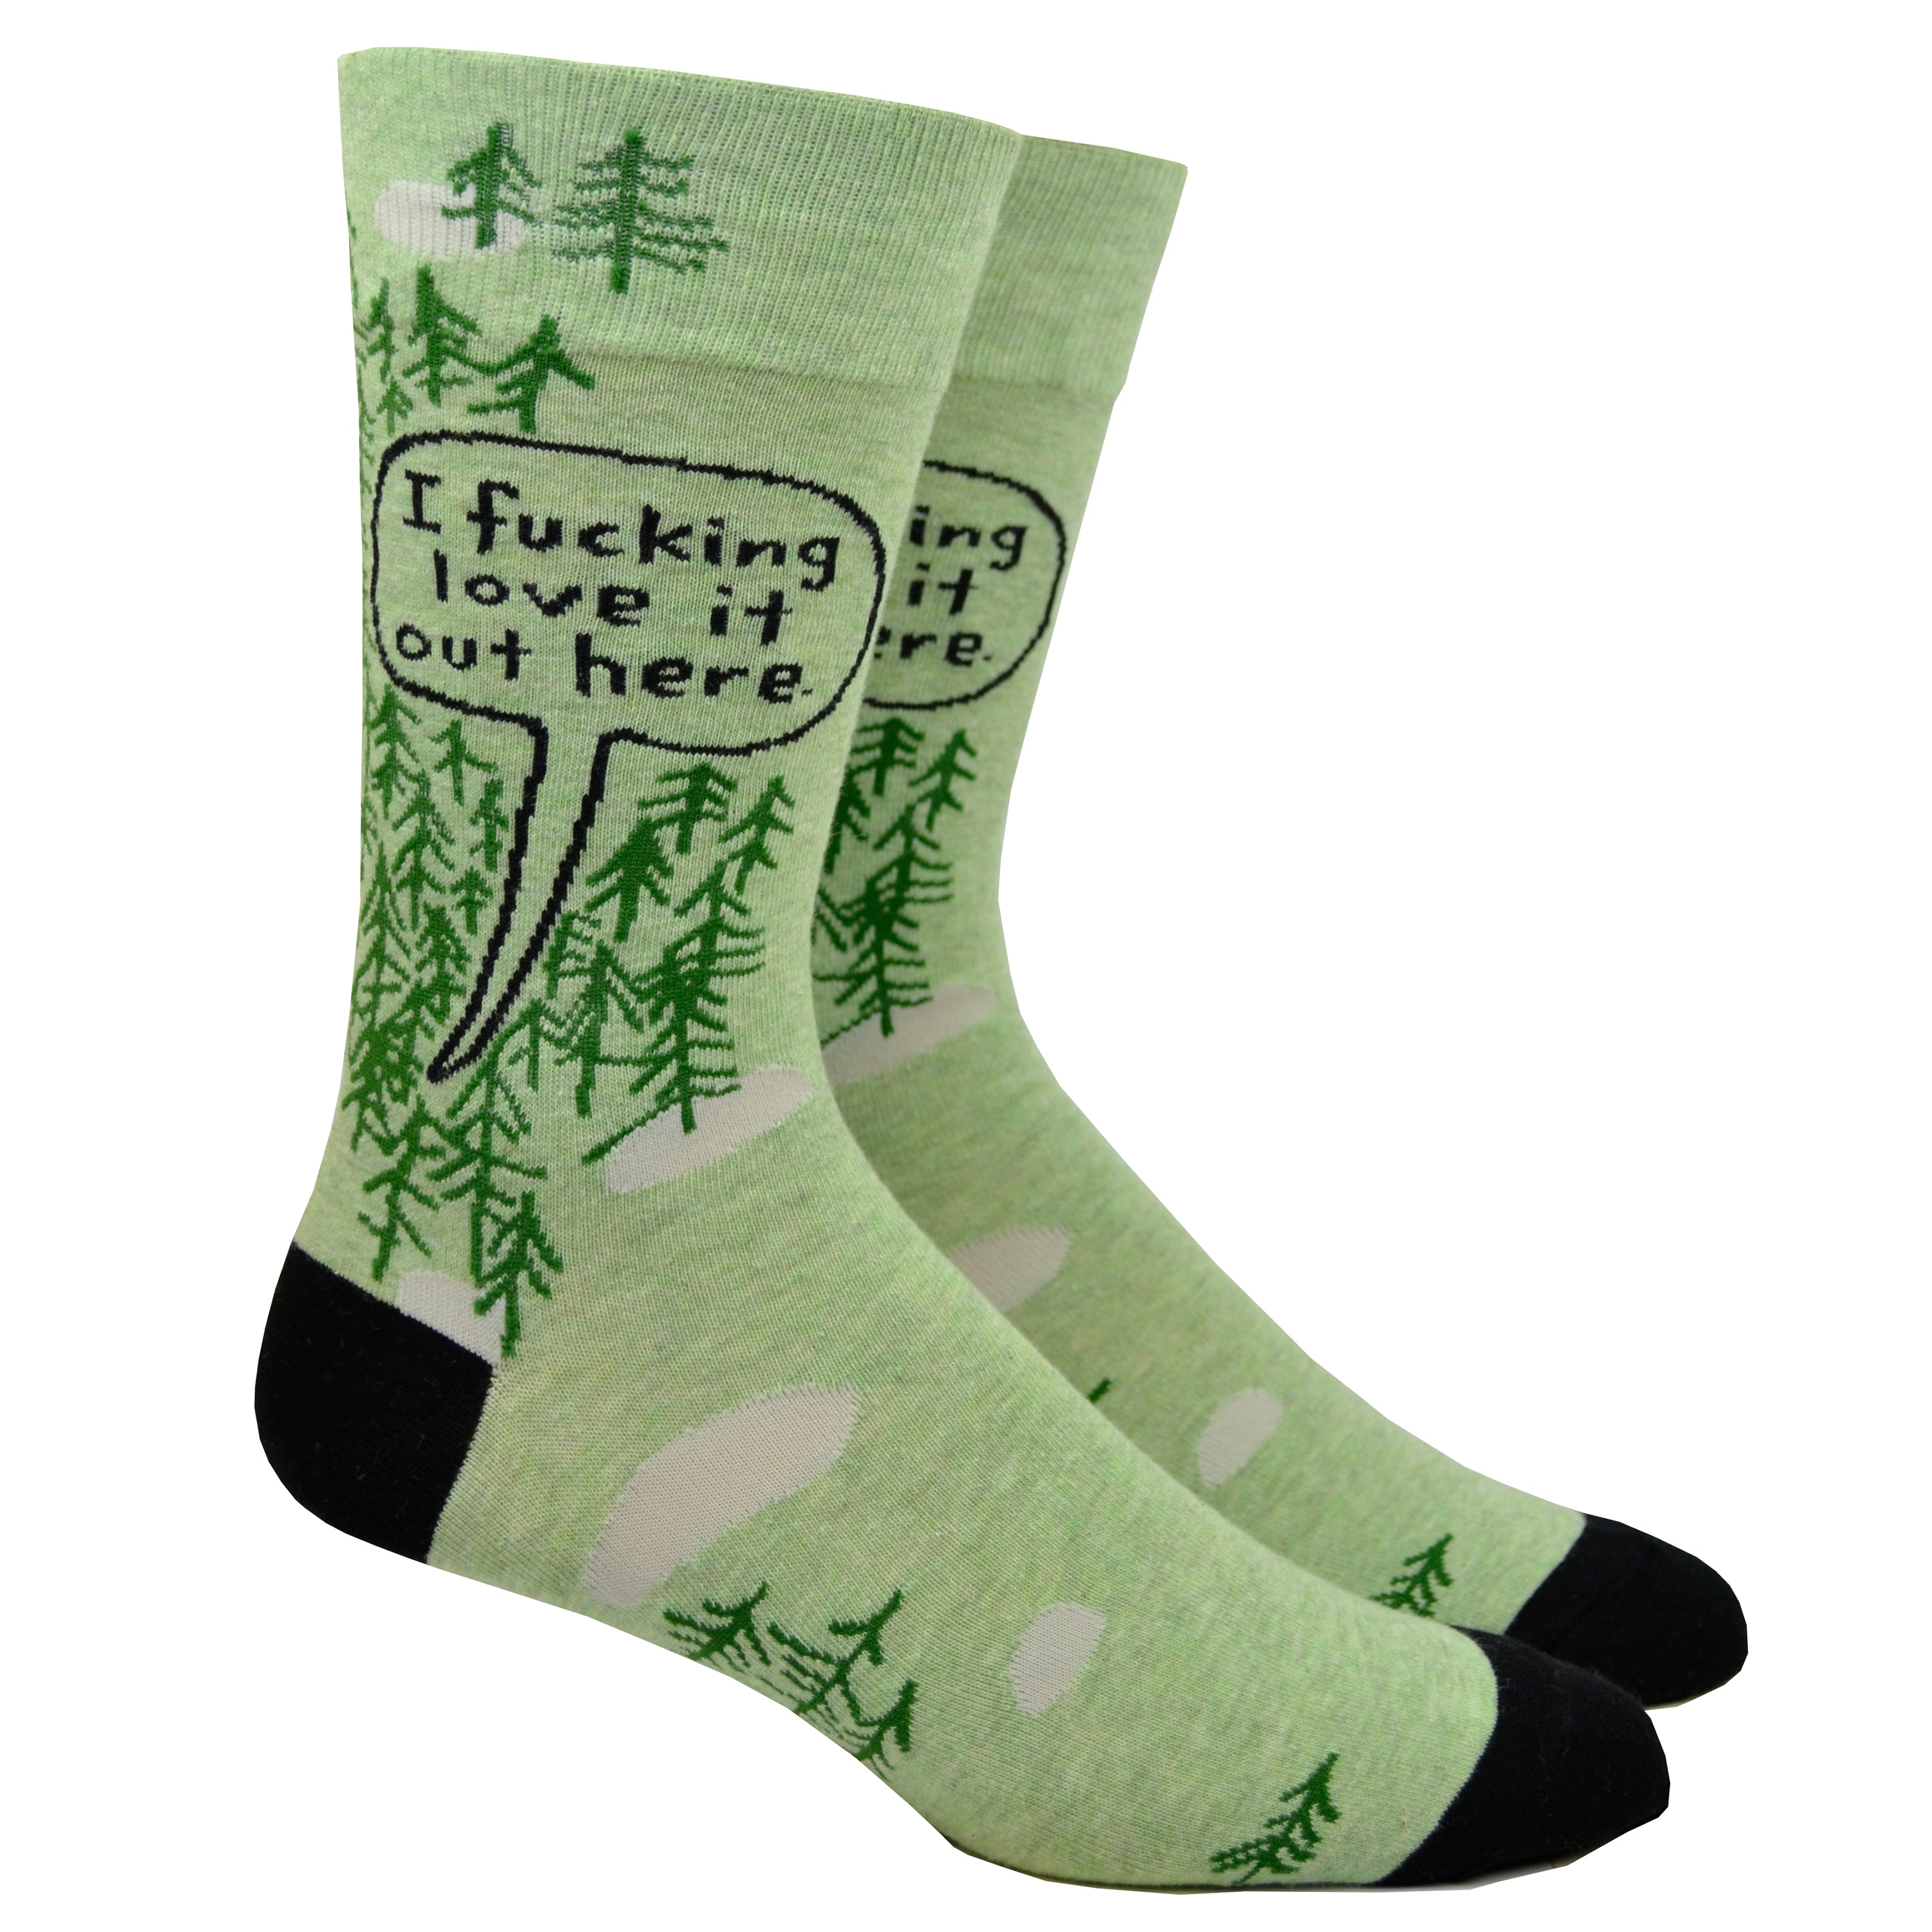 Shown on a leg form, these green cotton men's crew socks with a black heel and toe by the brand Blue Q feature simplistic trees with a large quote bubble proclaiming 